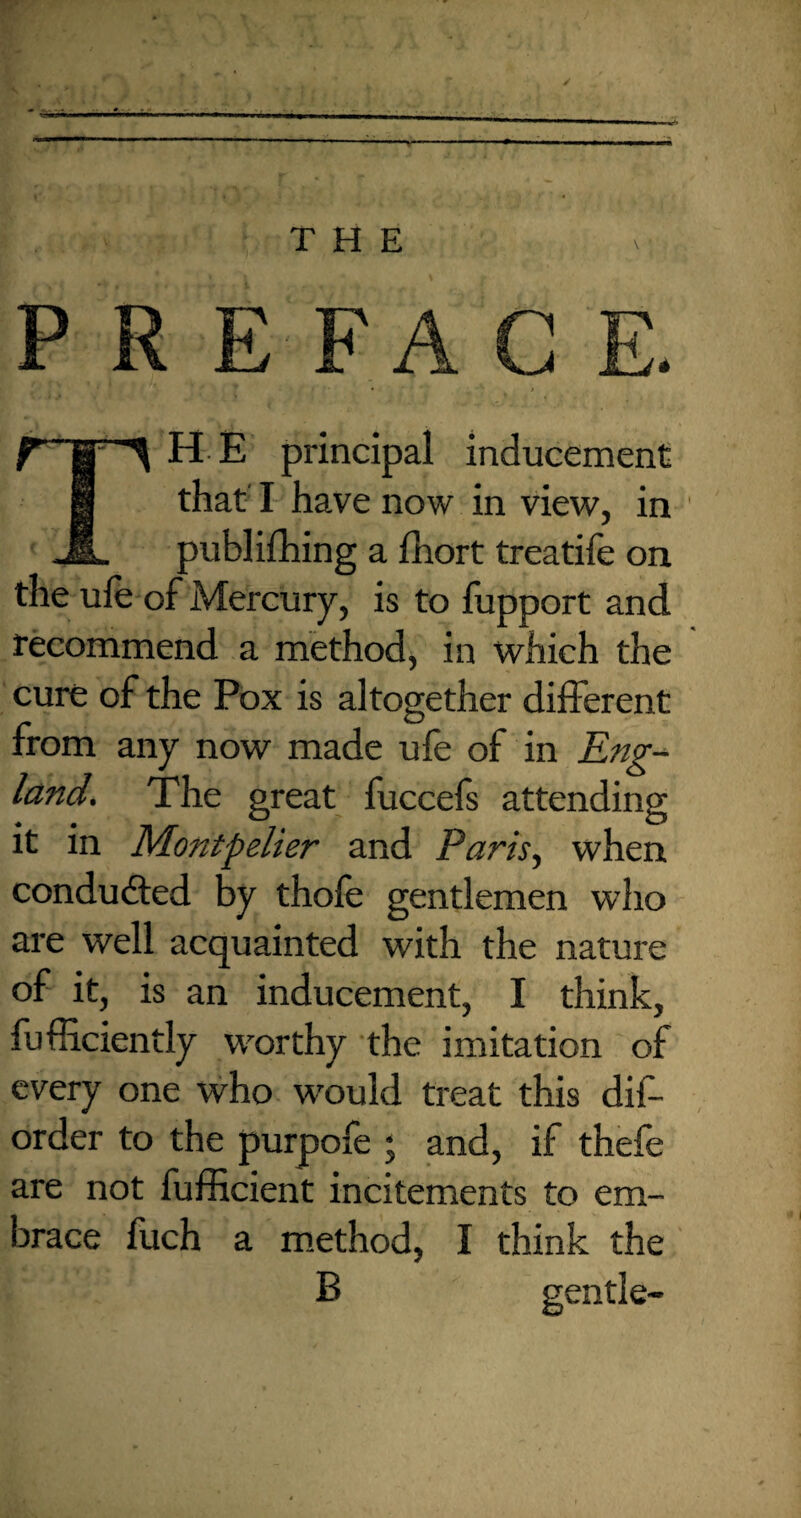 —* THE PREFACE. • ... i r~STS H E principal inducement H that I have now in view, in JL publifhing a fhort treatife on the ufe of Mercury, is to fupport and recommend a method, in which the cure of the Pox is altogether different from any now made ufe of in Eng¬ land. The great fuccefs attending it in Montpelier and Paris, when conducted by thofe gentlemen who are well acquainted with the nature of it, is an inducement, I think, fufRciently worthy the imitation of every one who would treat this dis¬ order to the purpofe ; and, if thefe are not fufficient incitements to em¬ brace fuch a method, I think the B gentle-